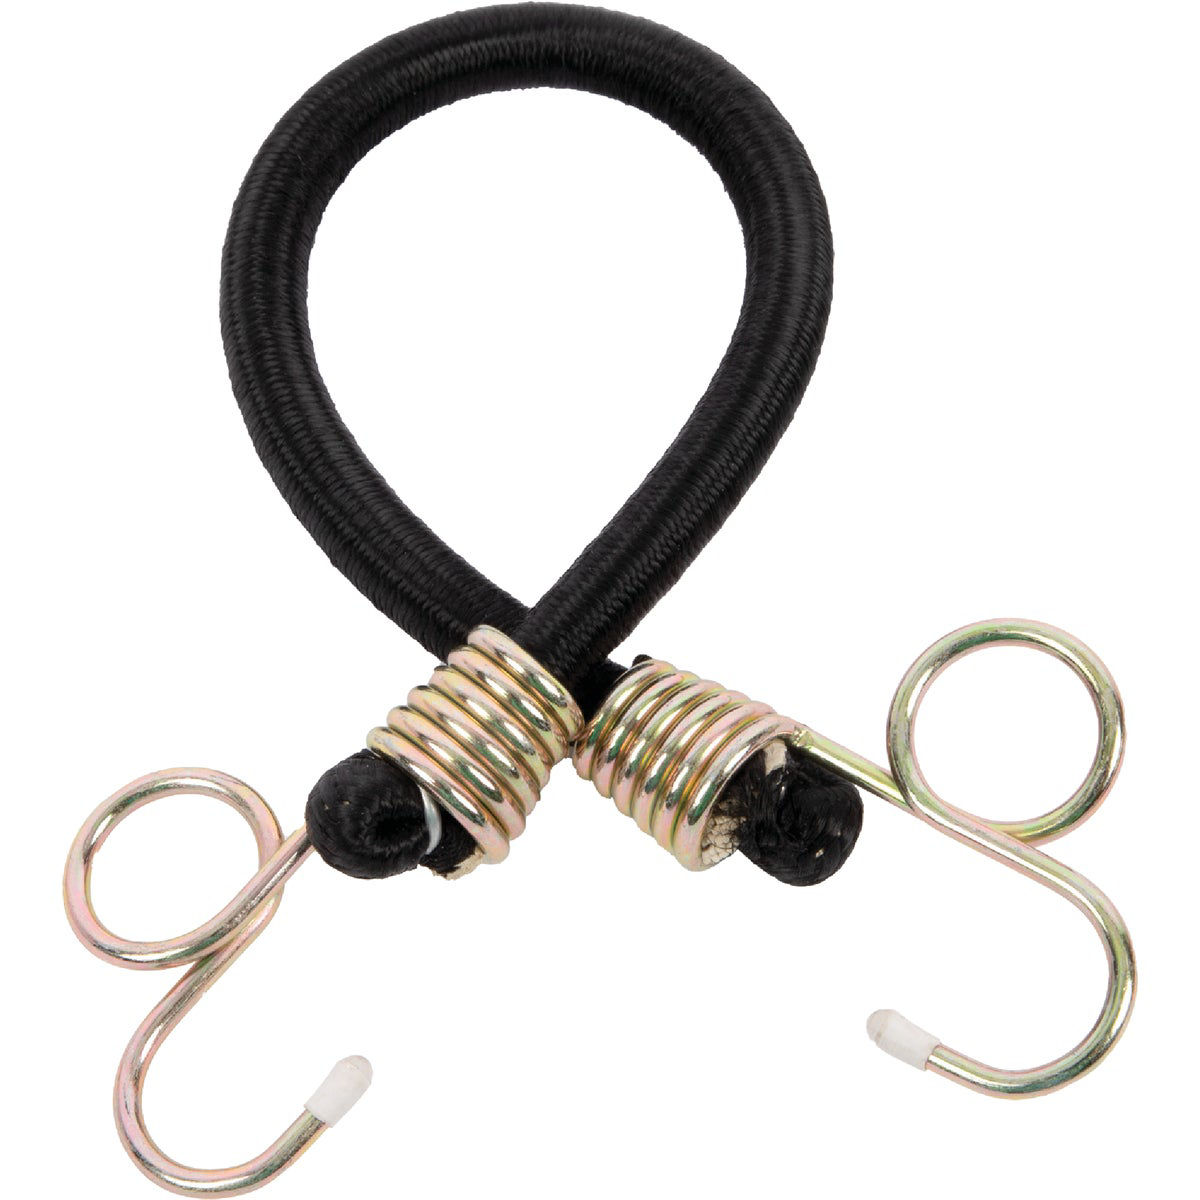 Erickson 1 In. x 24 In. Industrial Bungee Cord with Carabiner